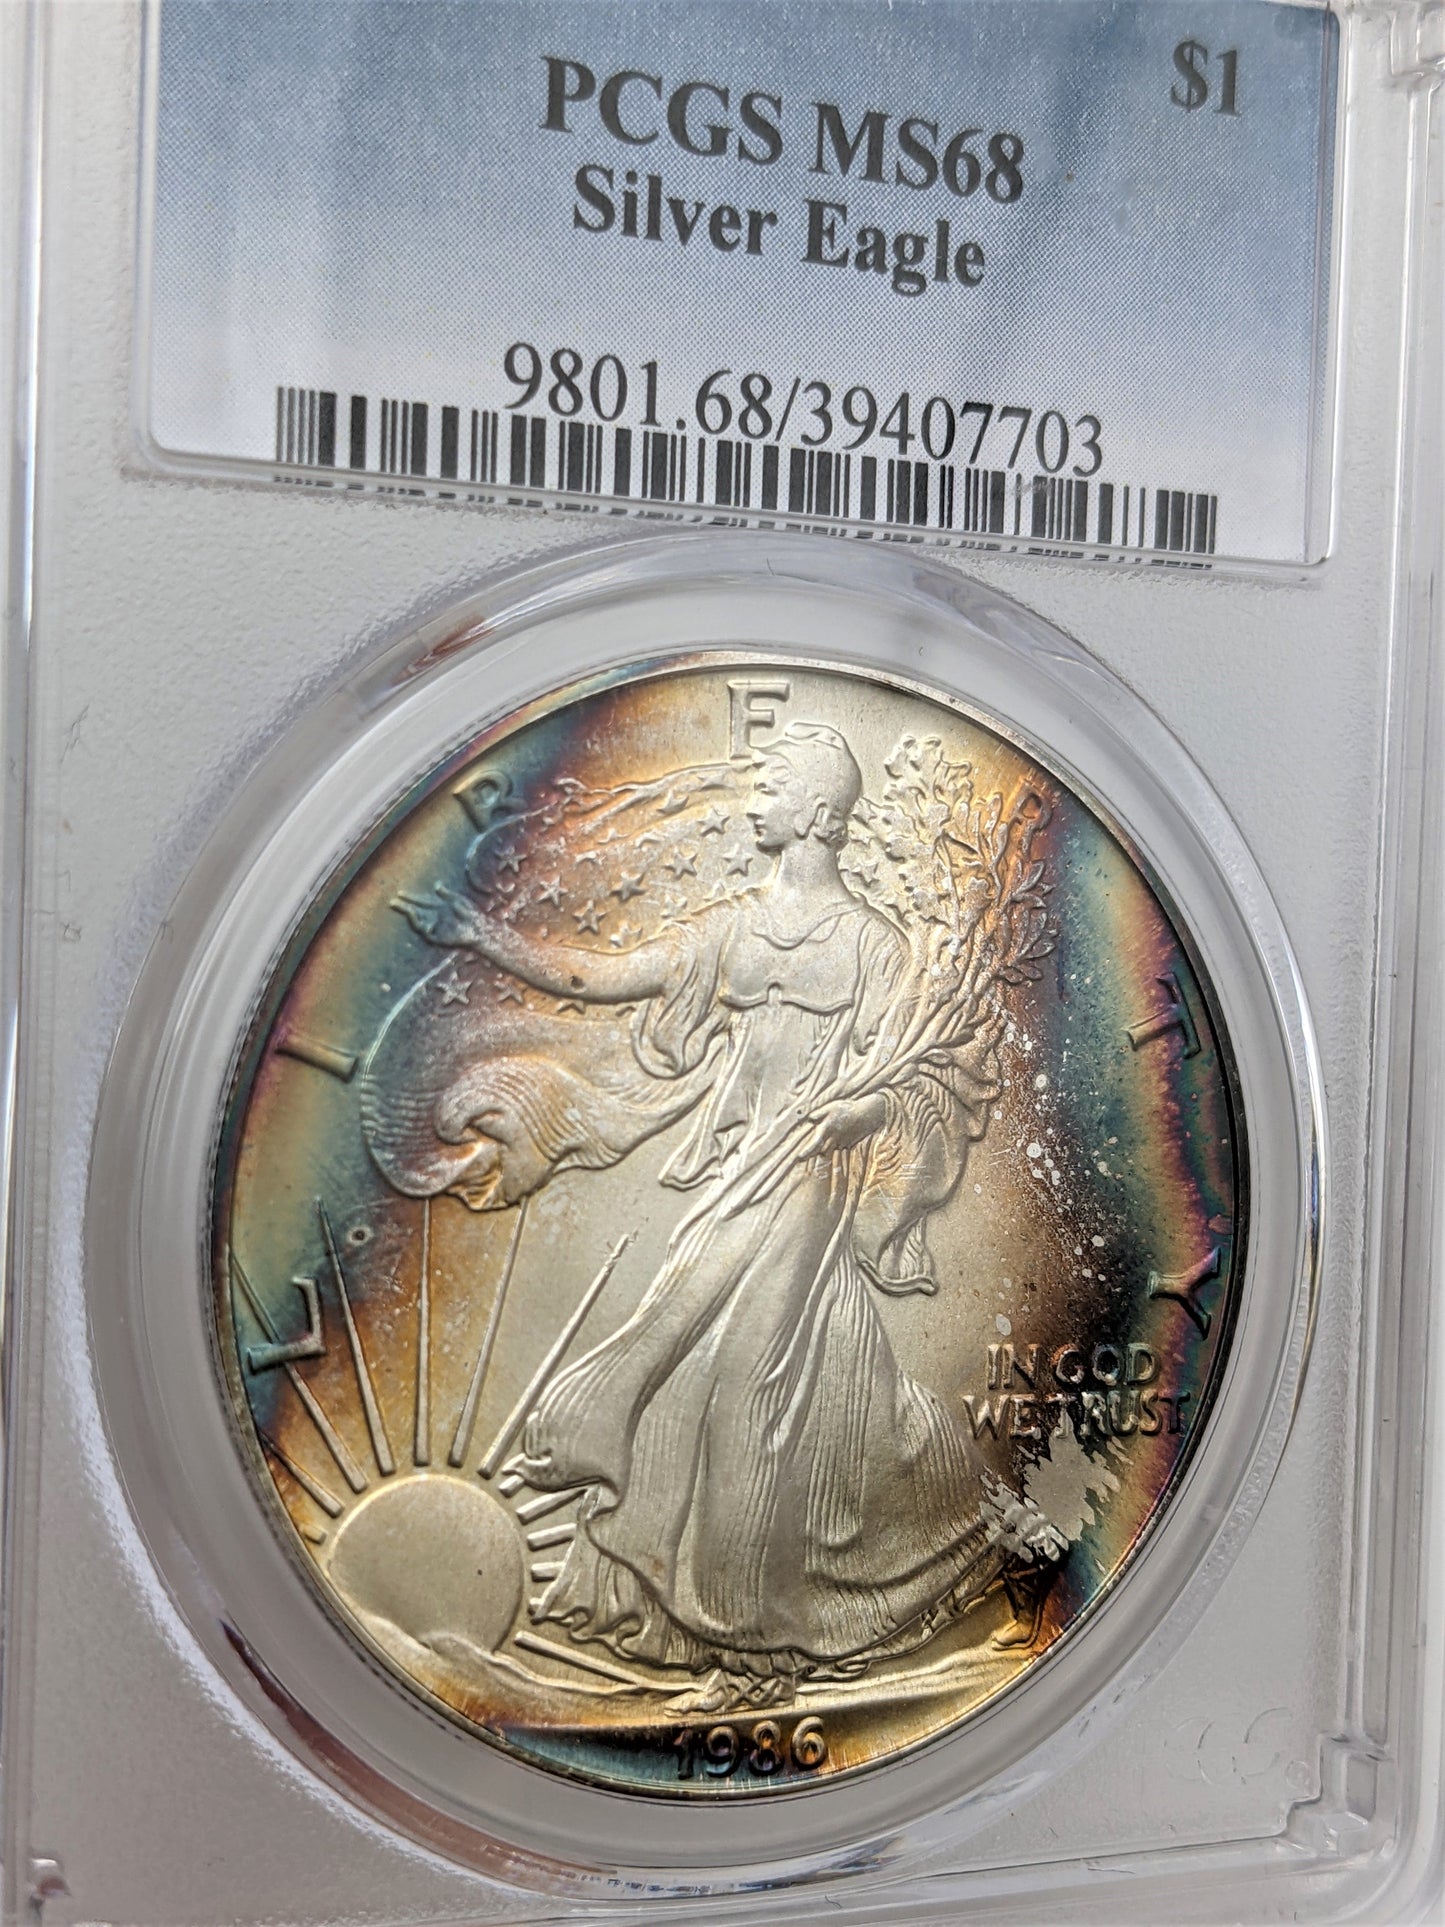 1986 Silver Eagle -Toning - PCGS MS68